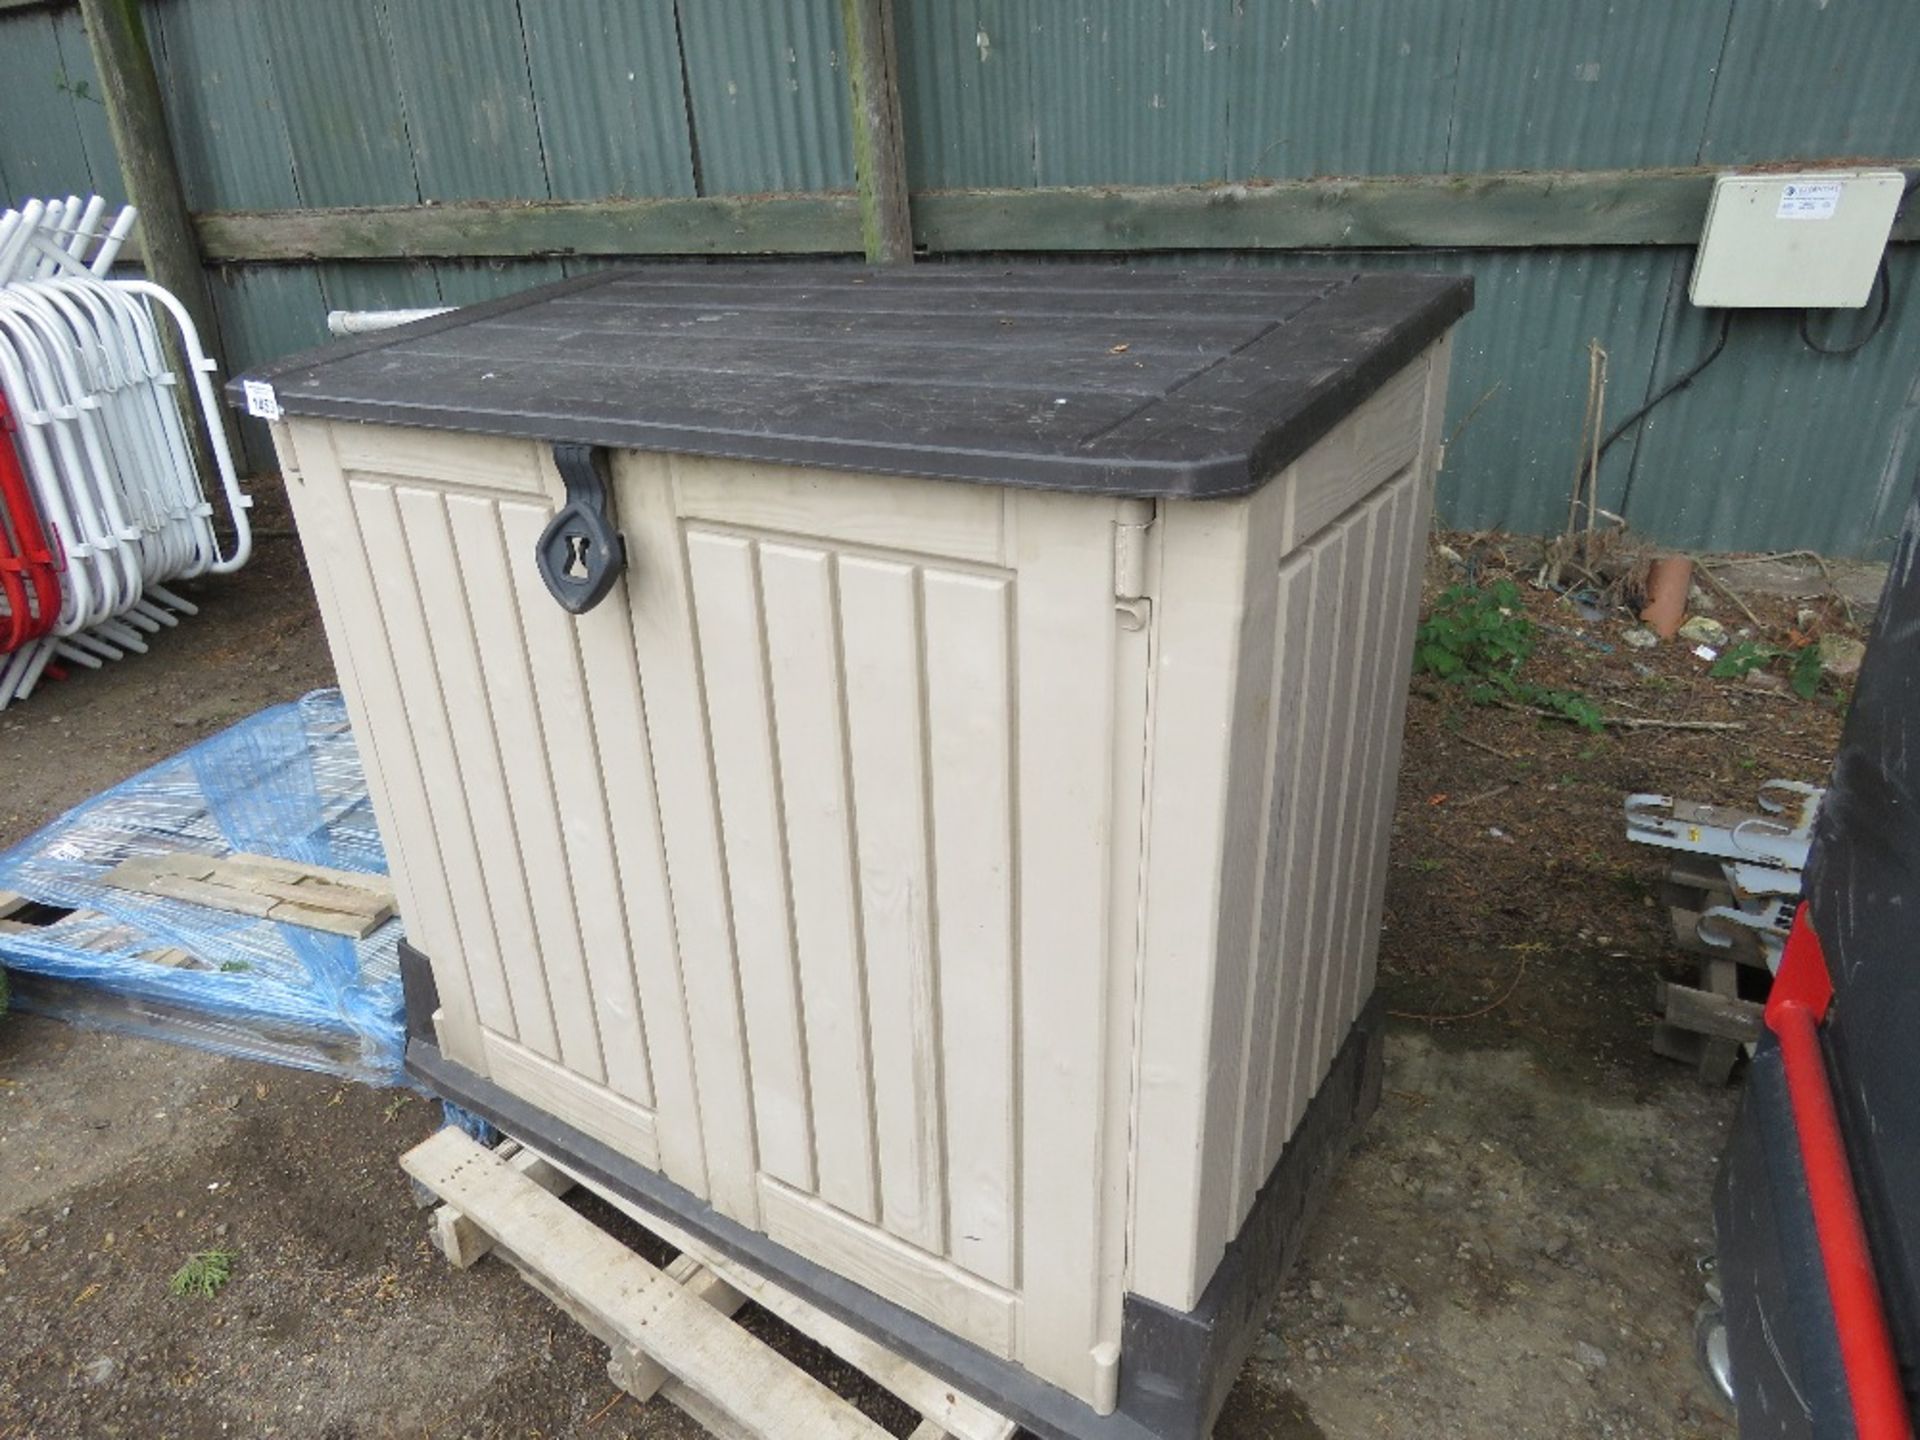 PLASTIC BIN STORE/GARDEN SHED: 1.2M WIDTH X 1M HEIGHT X 0.6M DEPTH APPROX. THIS LOT IS SOLD UNDER - Image 2 of 7